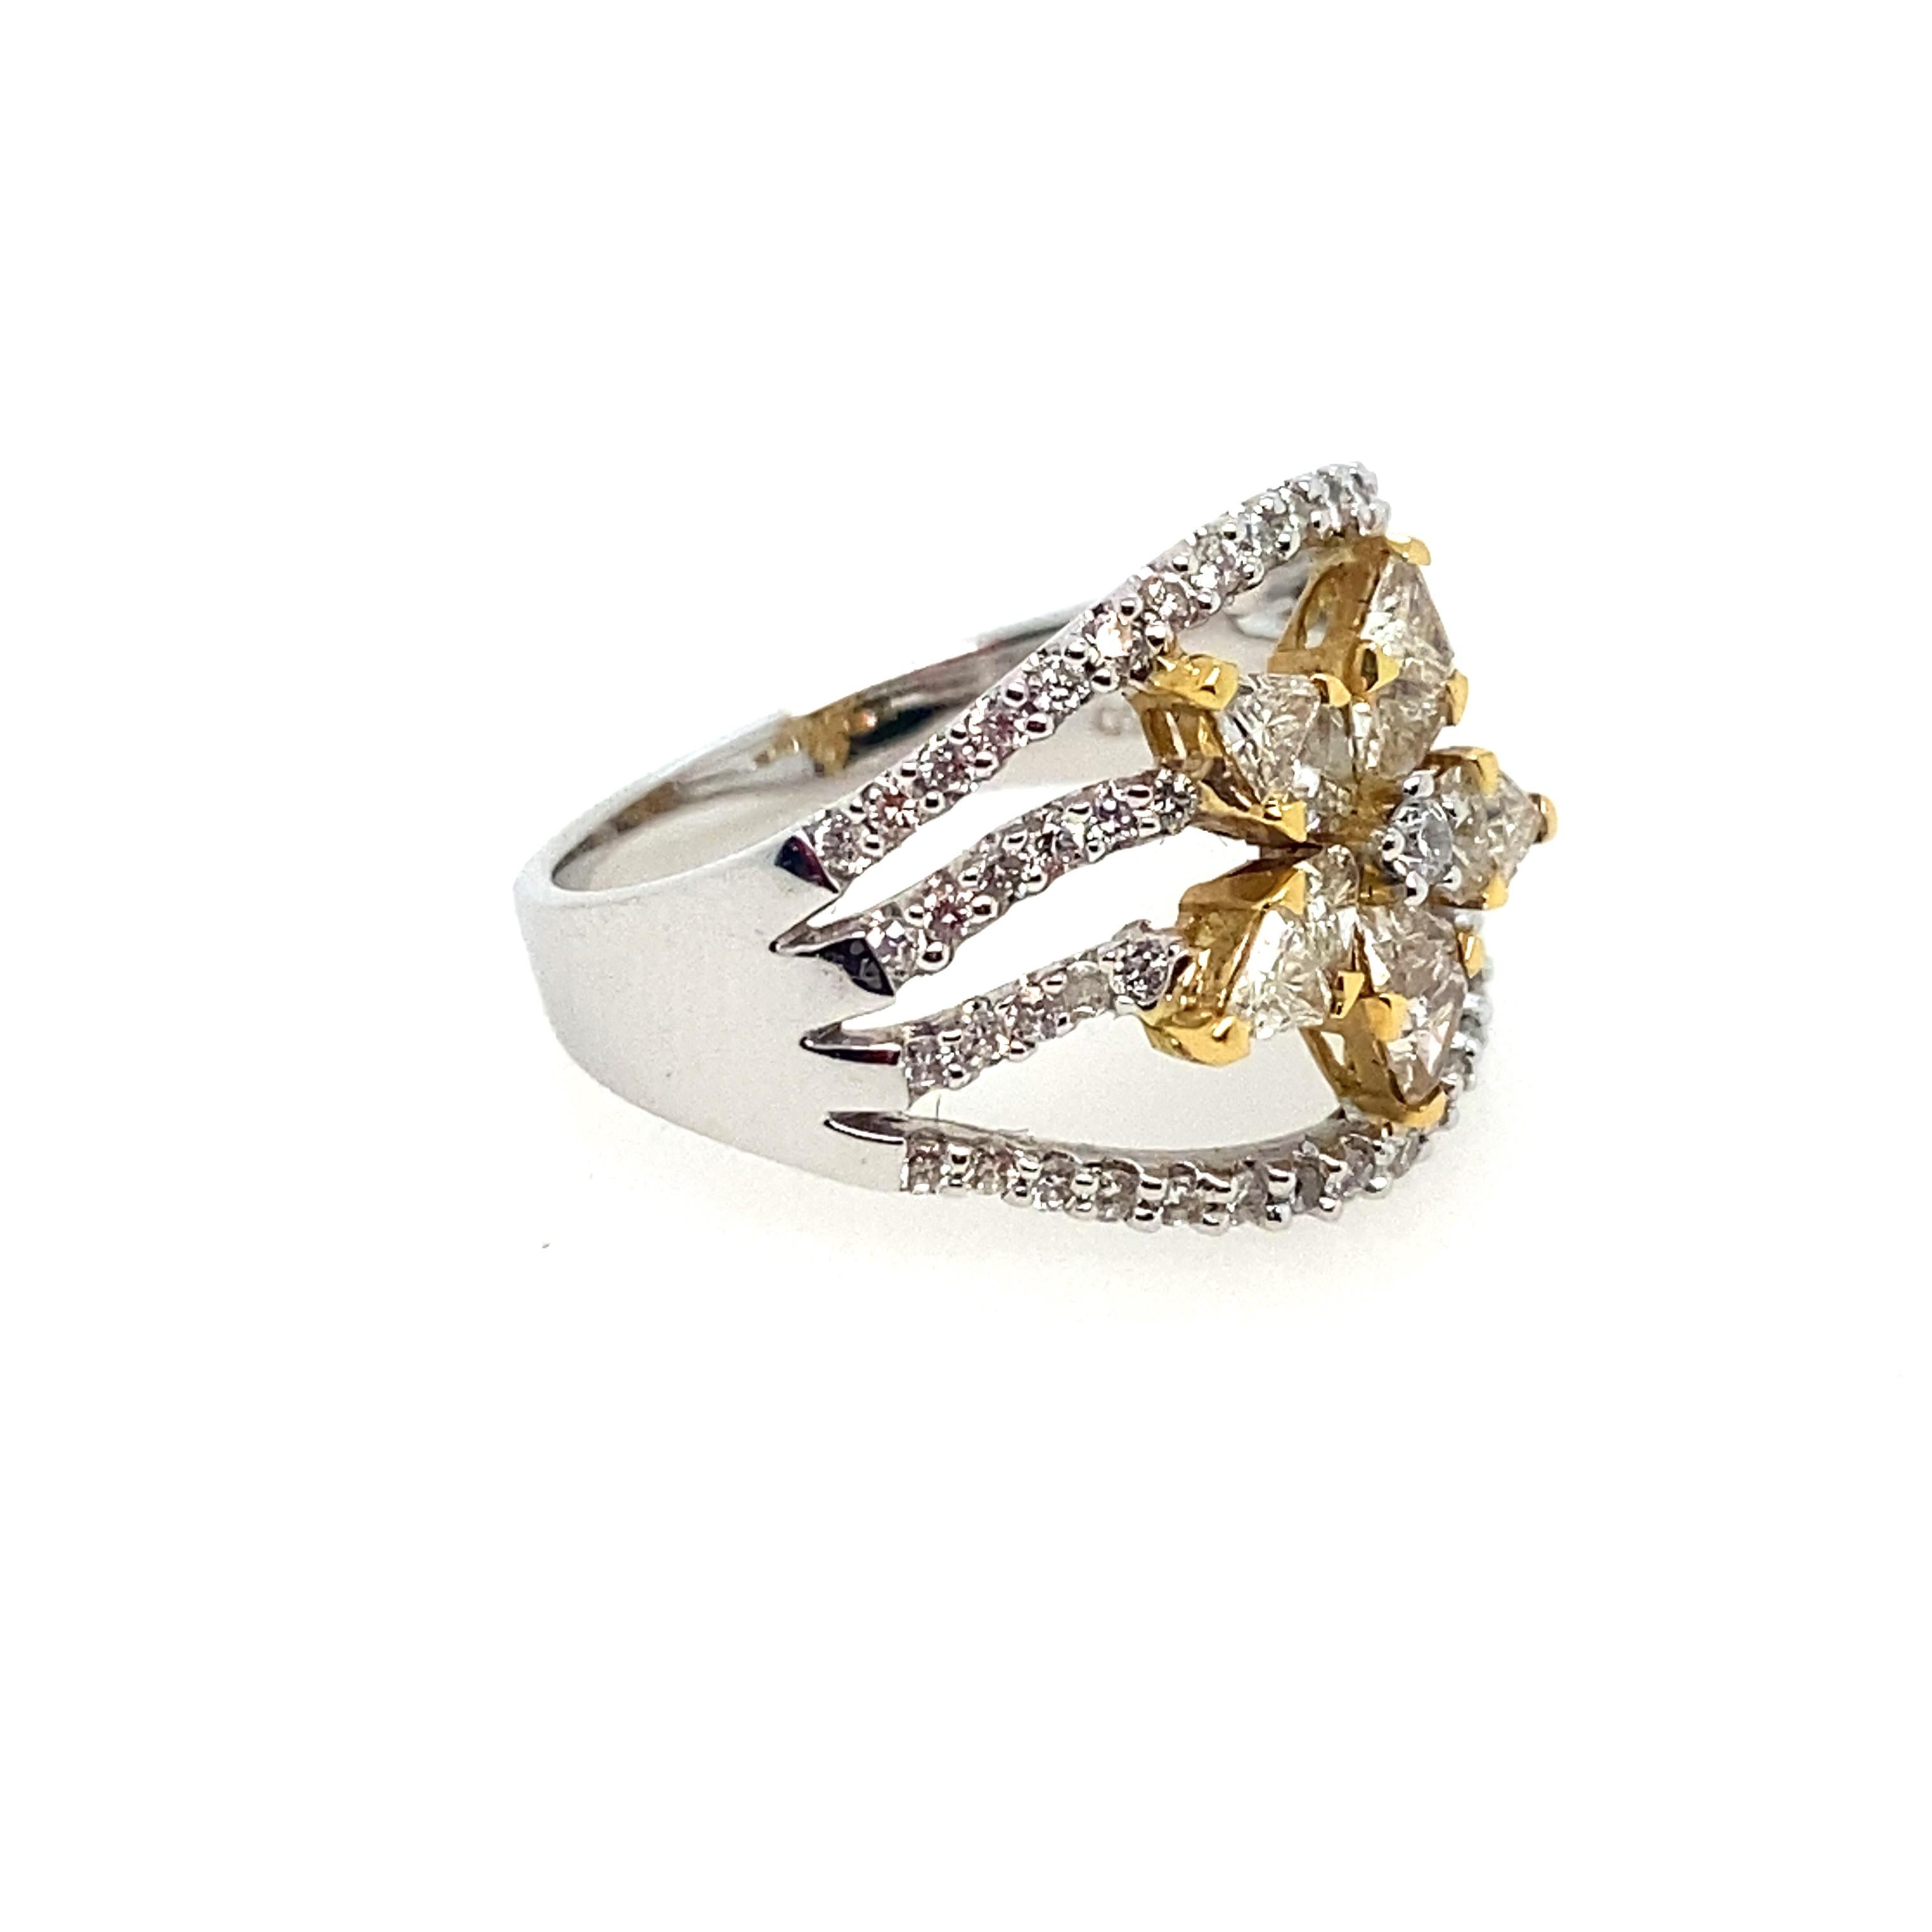 Diamond Flower ring in 18kt two-tone gold.  The wide band ring weighs 5.8 grams.  It has pale, natural yellow diamond petals, and white round diamonds going down the shank, in a split band design.  The total weight of these diamond is 0.94cts.  The